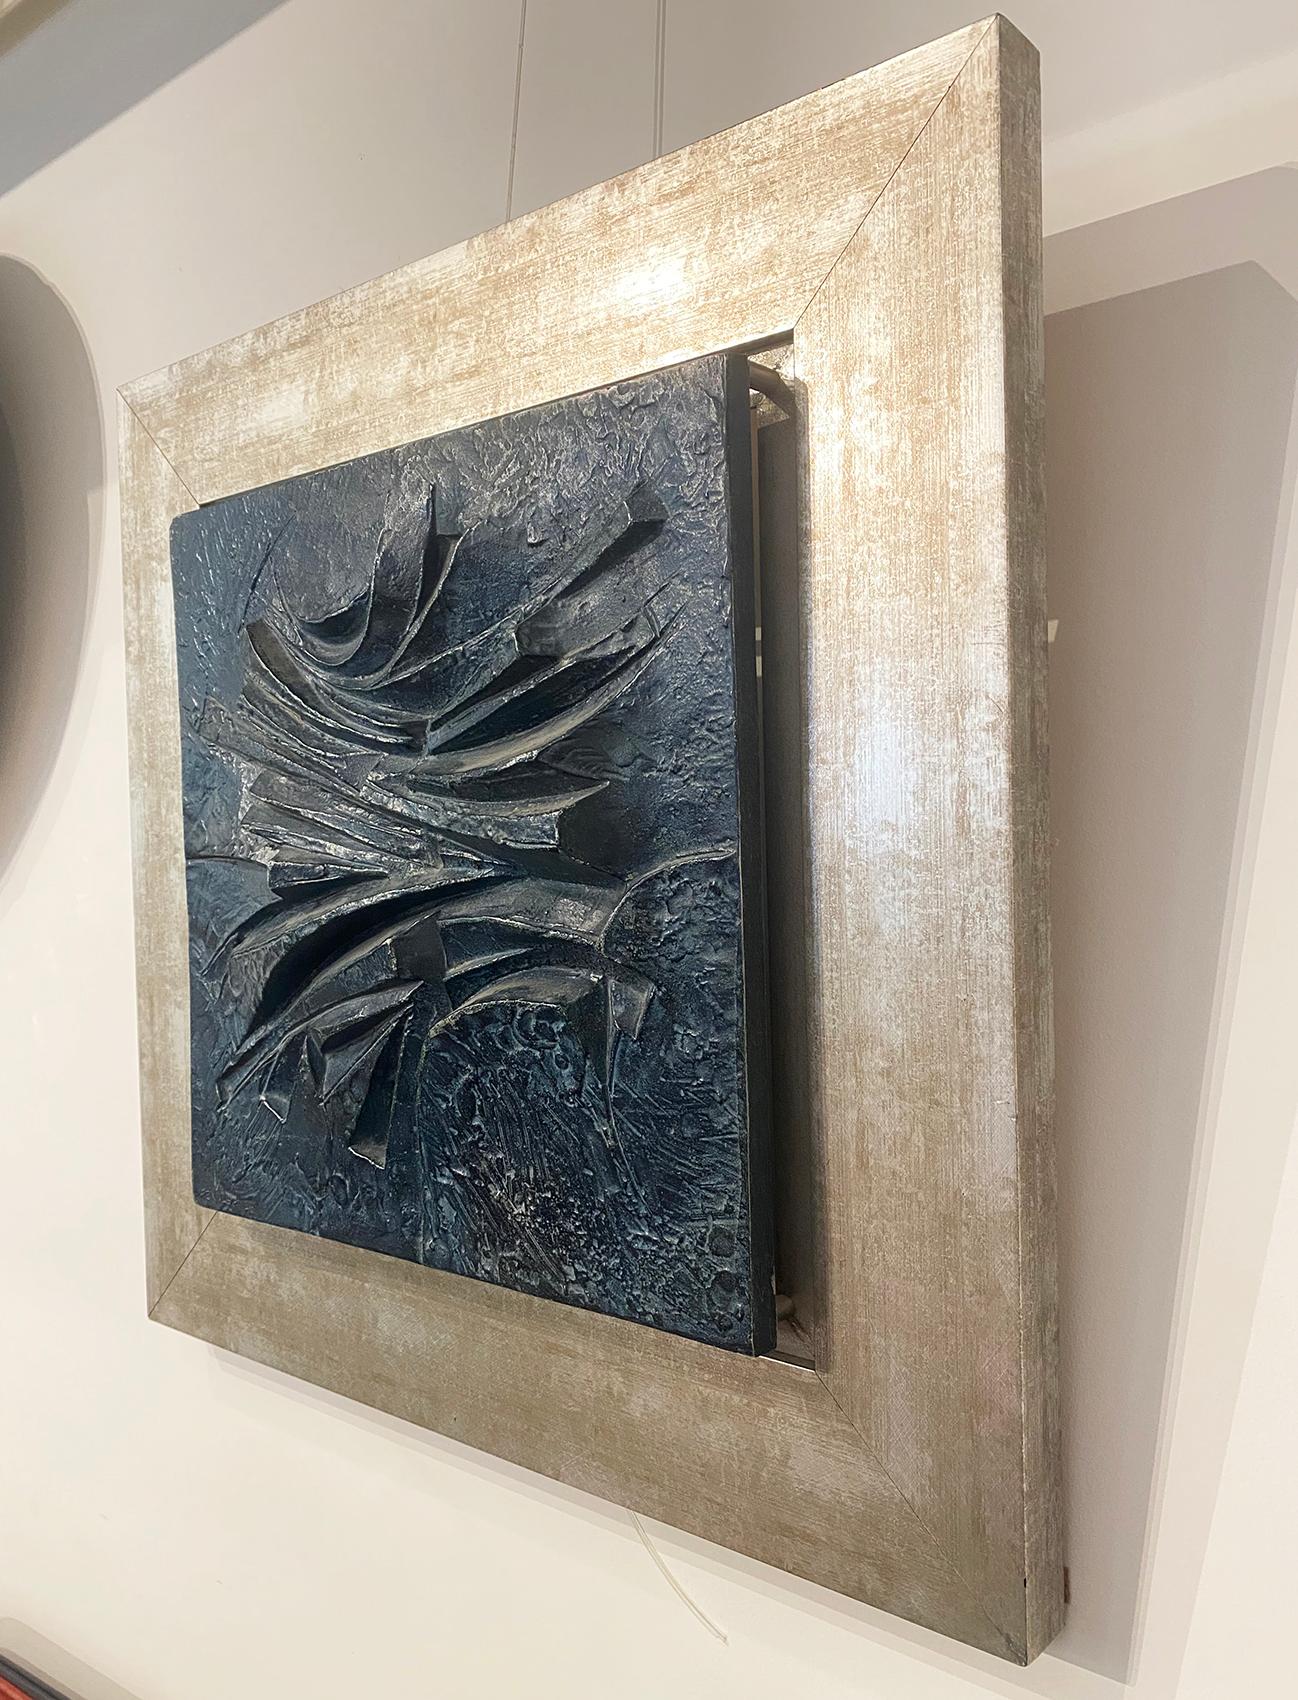 Sculpture by Alicia Penalba, bas relief in metal alloy, signed Alicia Penalba, dedicated from the back, dim: 60 x 60 cm. 
Penalba arrived in Paris in 1948, with a scholarship from the French government and was awarded the engraving medal for